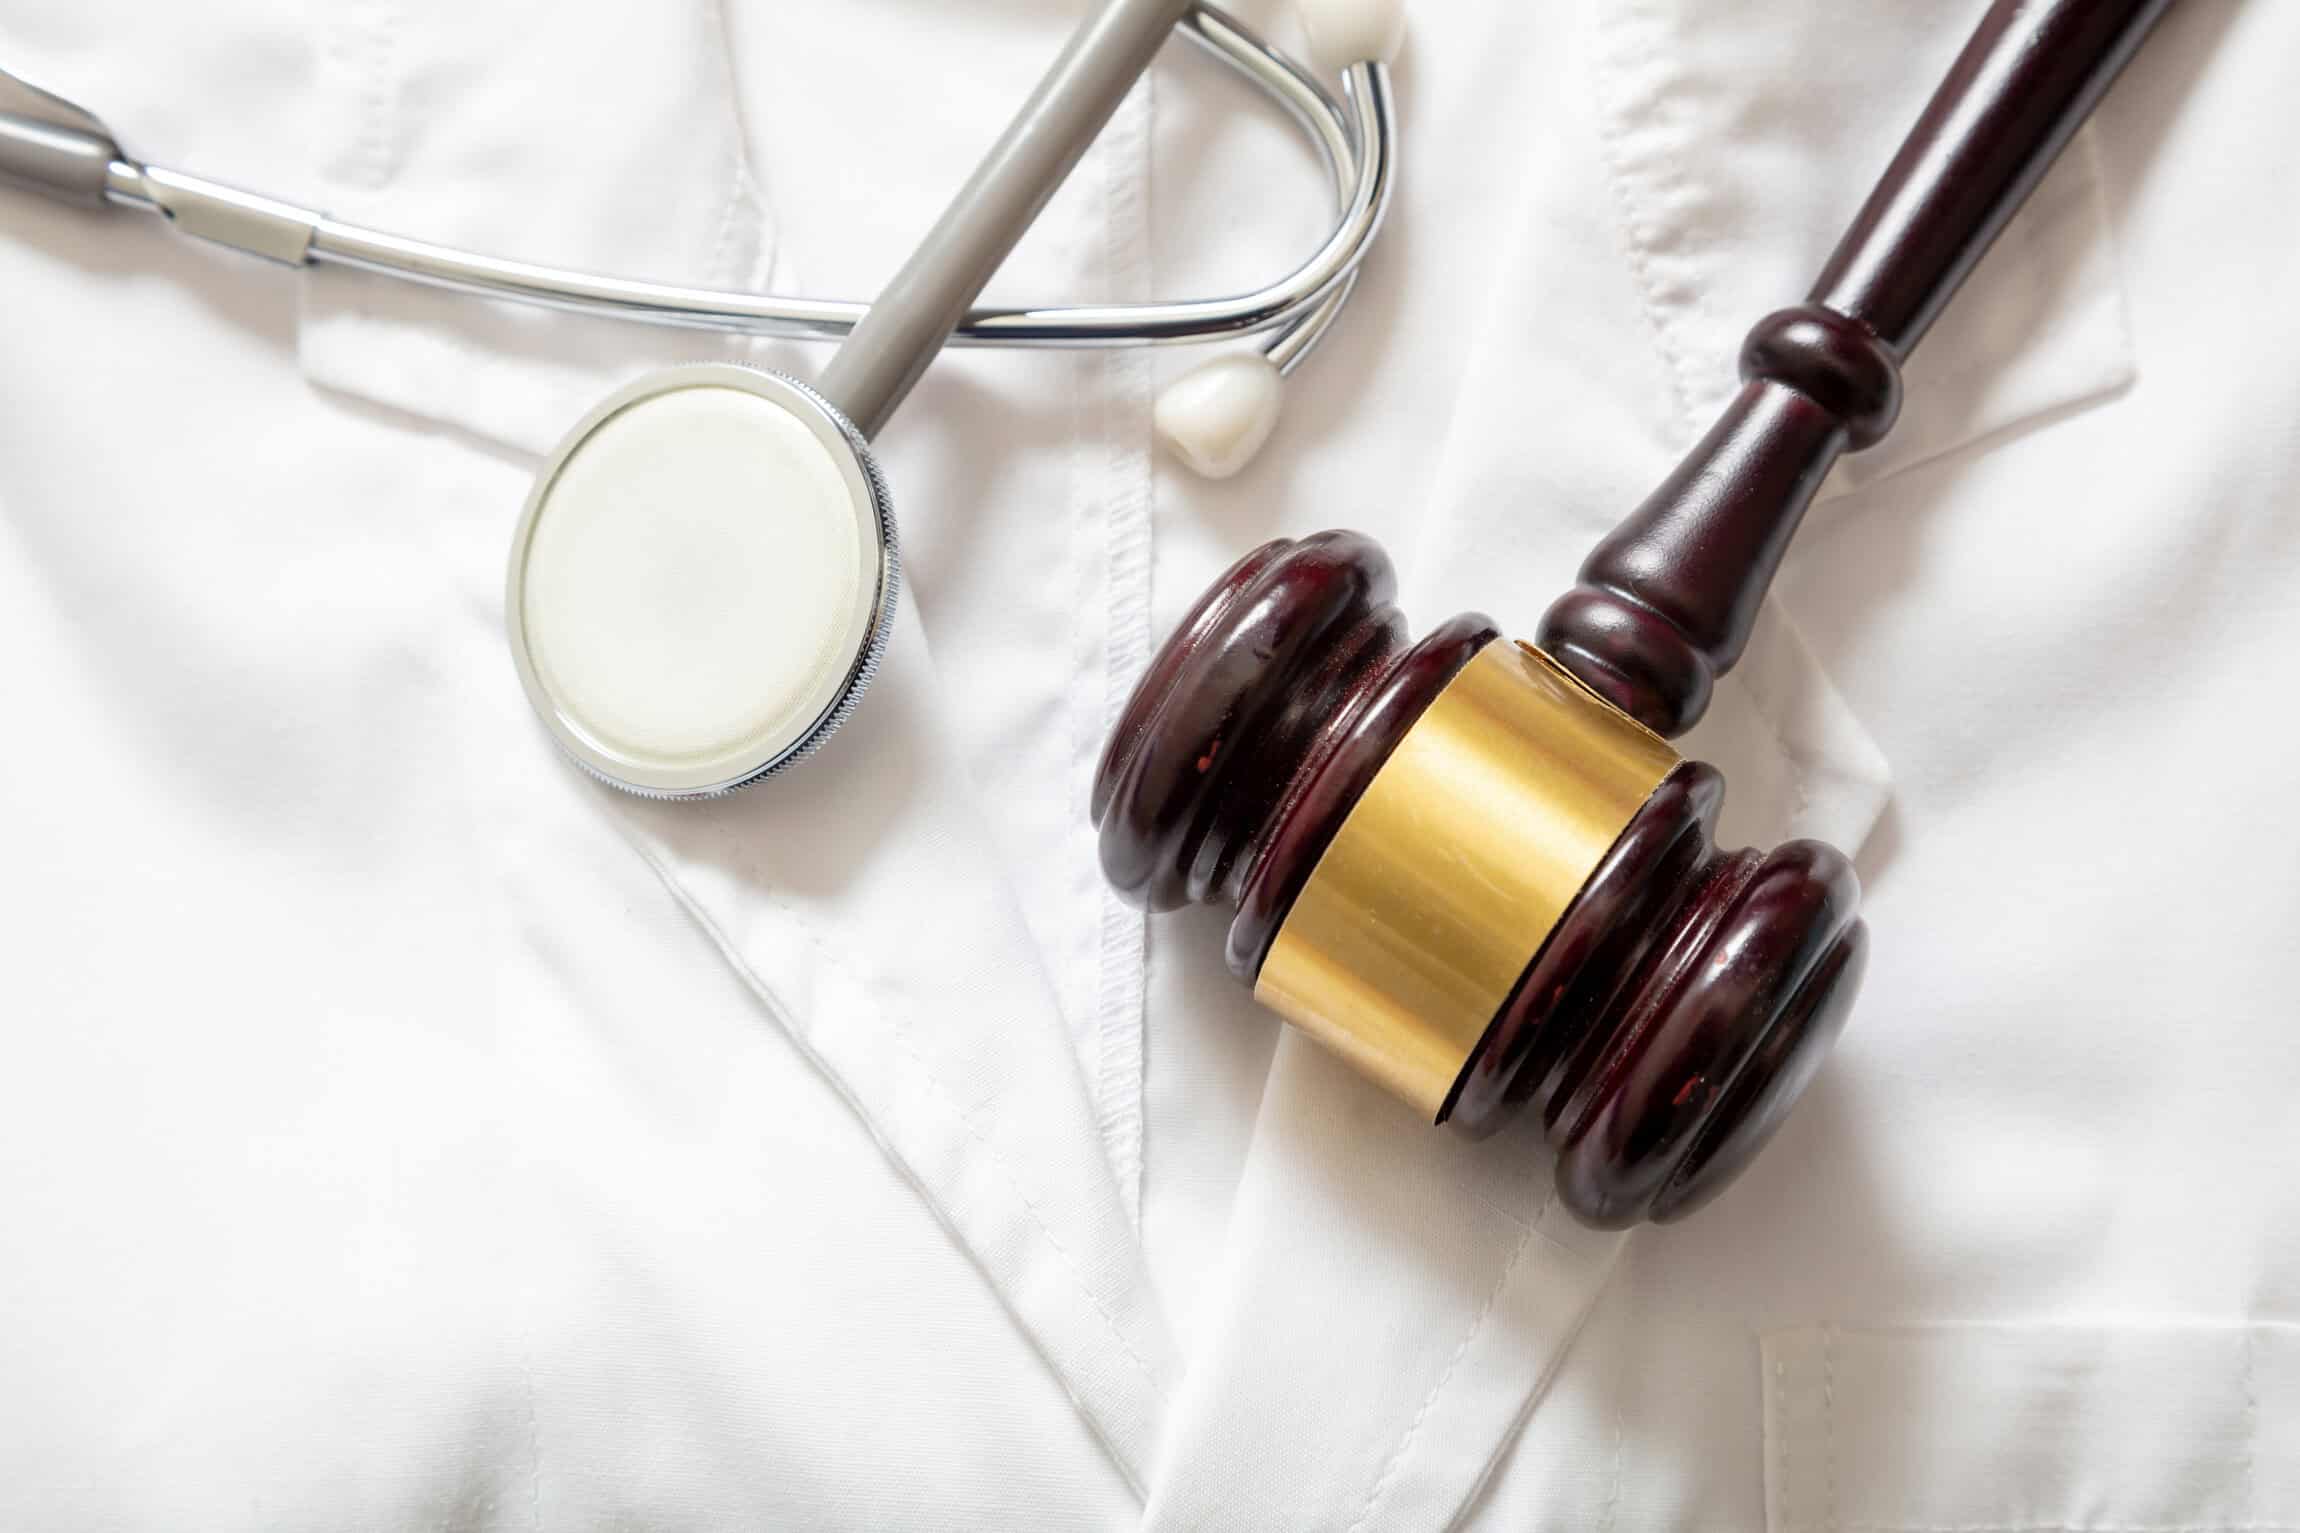 Judge gavel and stethoscope on doctor coat, top view